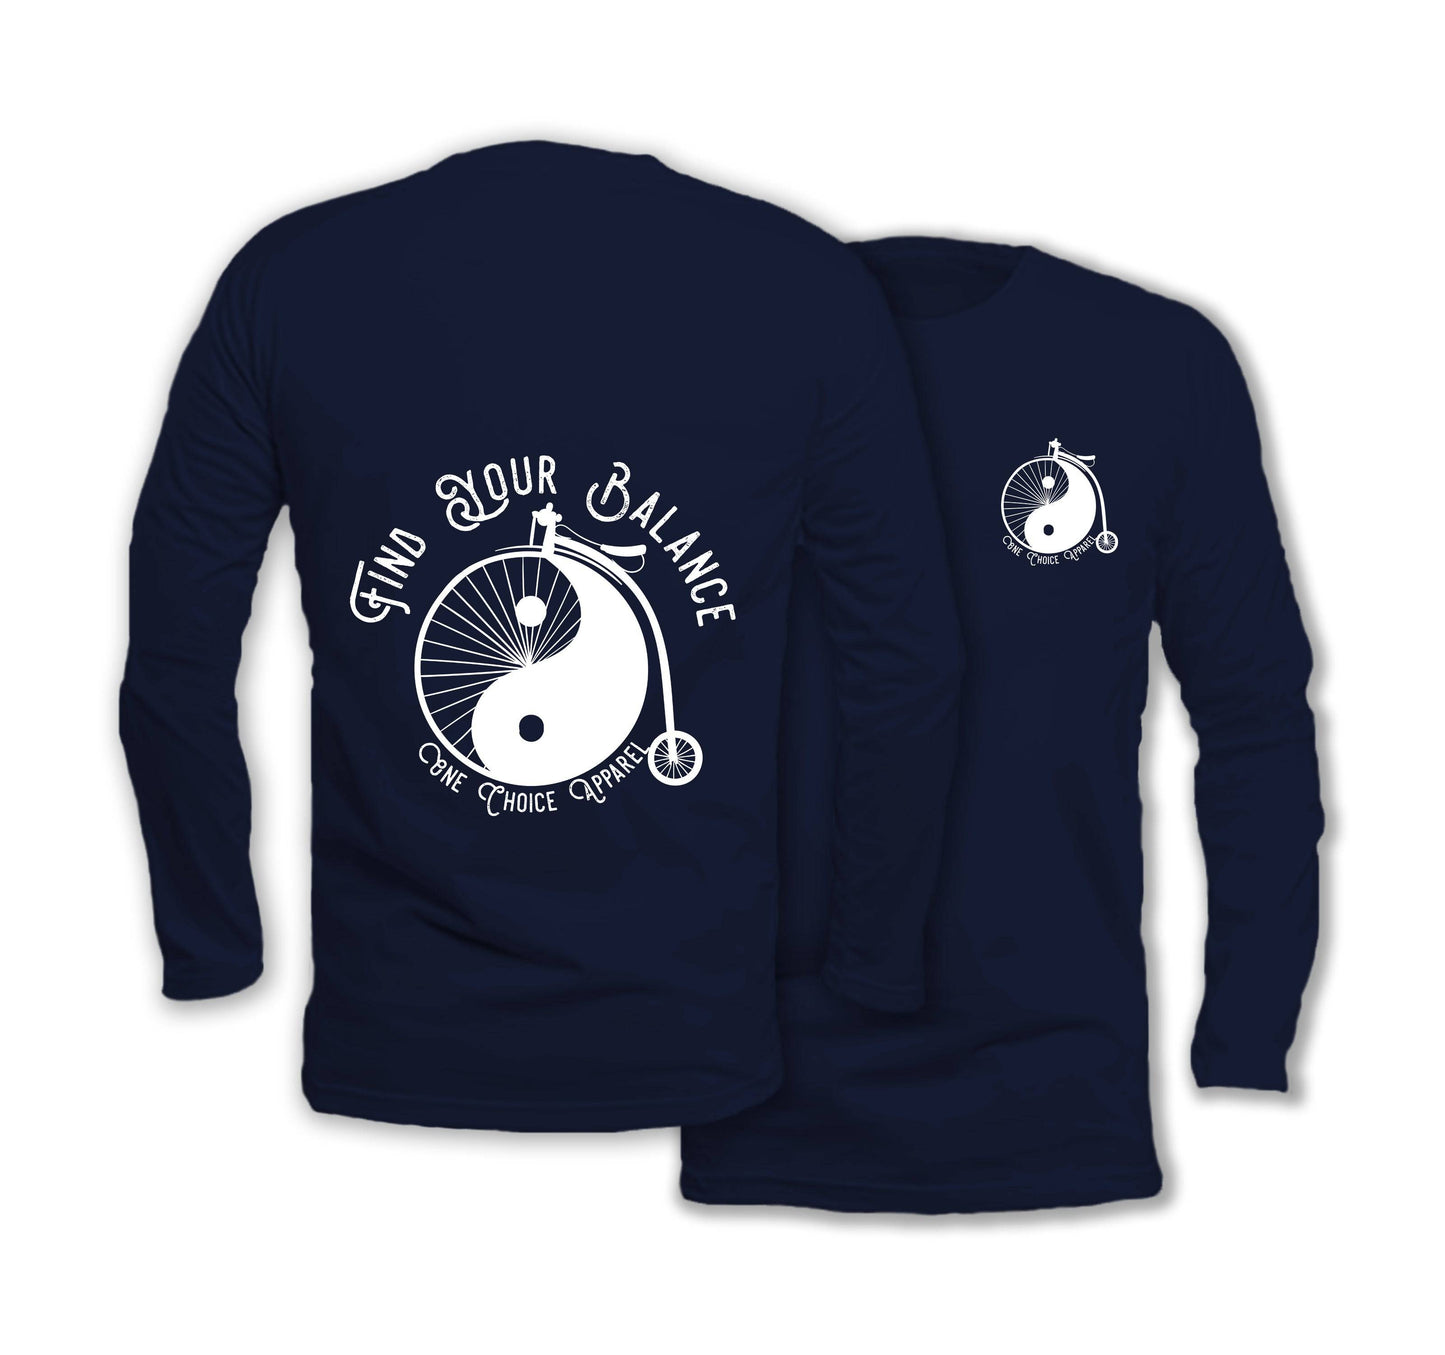 Find Your Balance - Long Sleeve Organic Cotton T-Shirt - One Choice Apparel